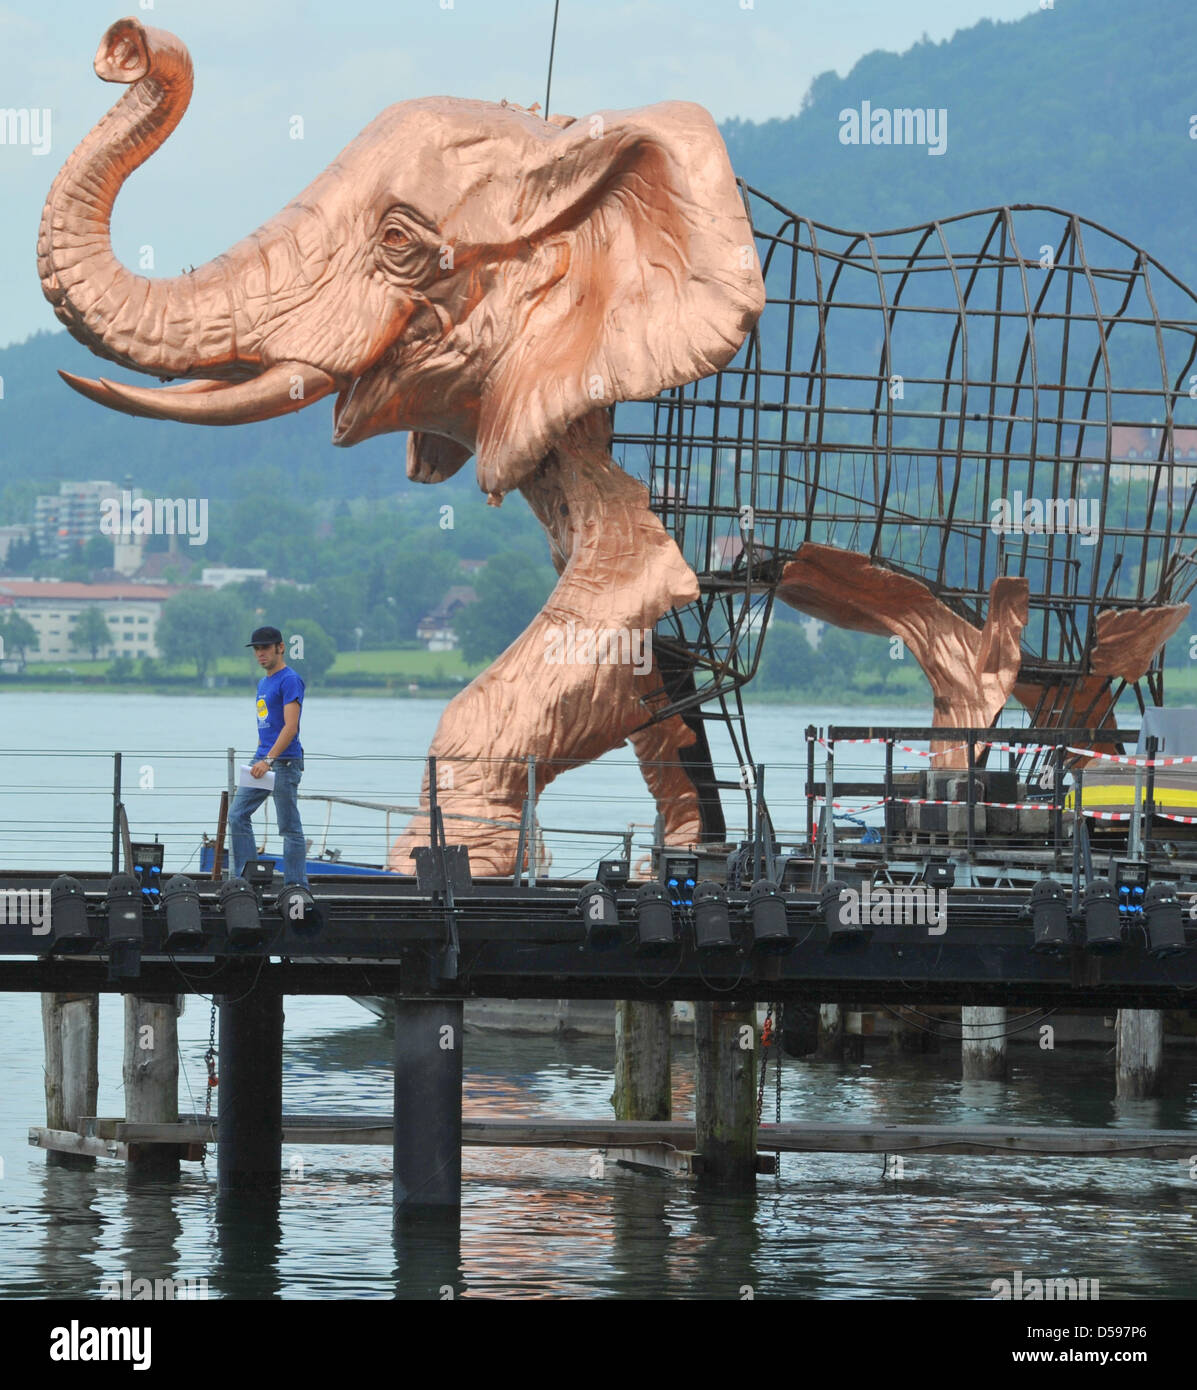 A huge elephant, part of the stage setting for the opera Aida, arrives at the lake theatre 'Seebuehne' in Bregenz, Austria, 14 June 2010. The sculpture is more than 8m tall and 14 metres long and was ferried across Lake Constance from Fussach, which is situated 10km from Bregenz.  Aida will premiere at the world's largest lake stage on 22 July 2010. Photo: STEFAN PUCHNER Stock Photo